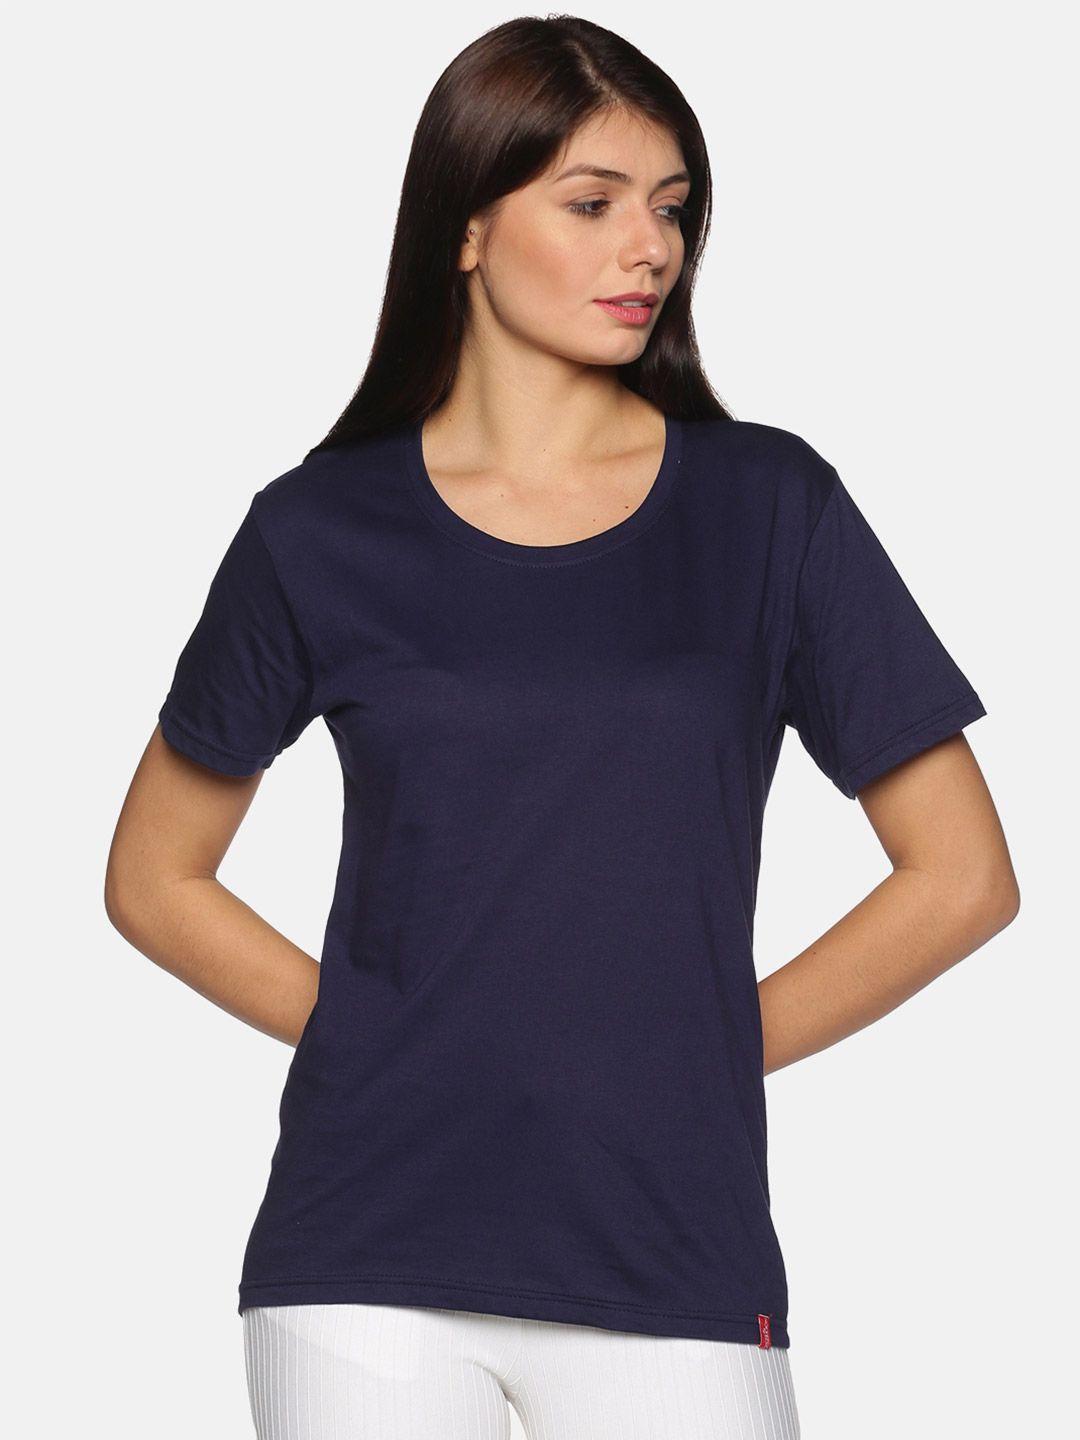 not-yet-by-us-women-navy-blue-cotton-t-shirt